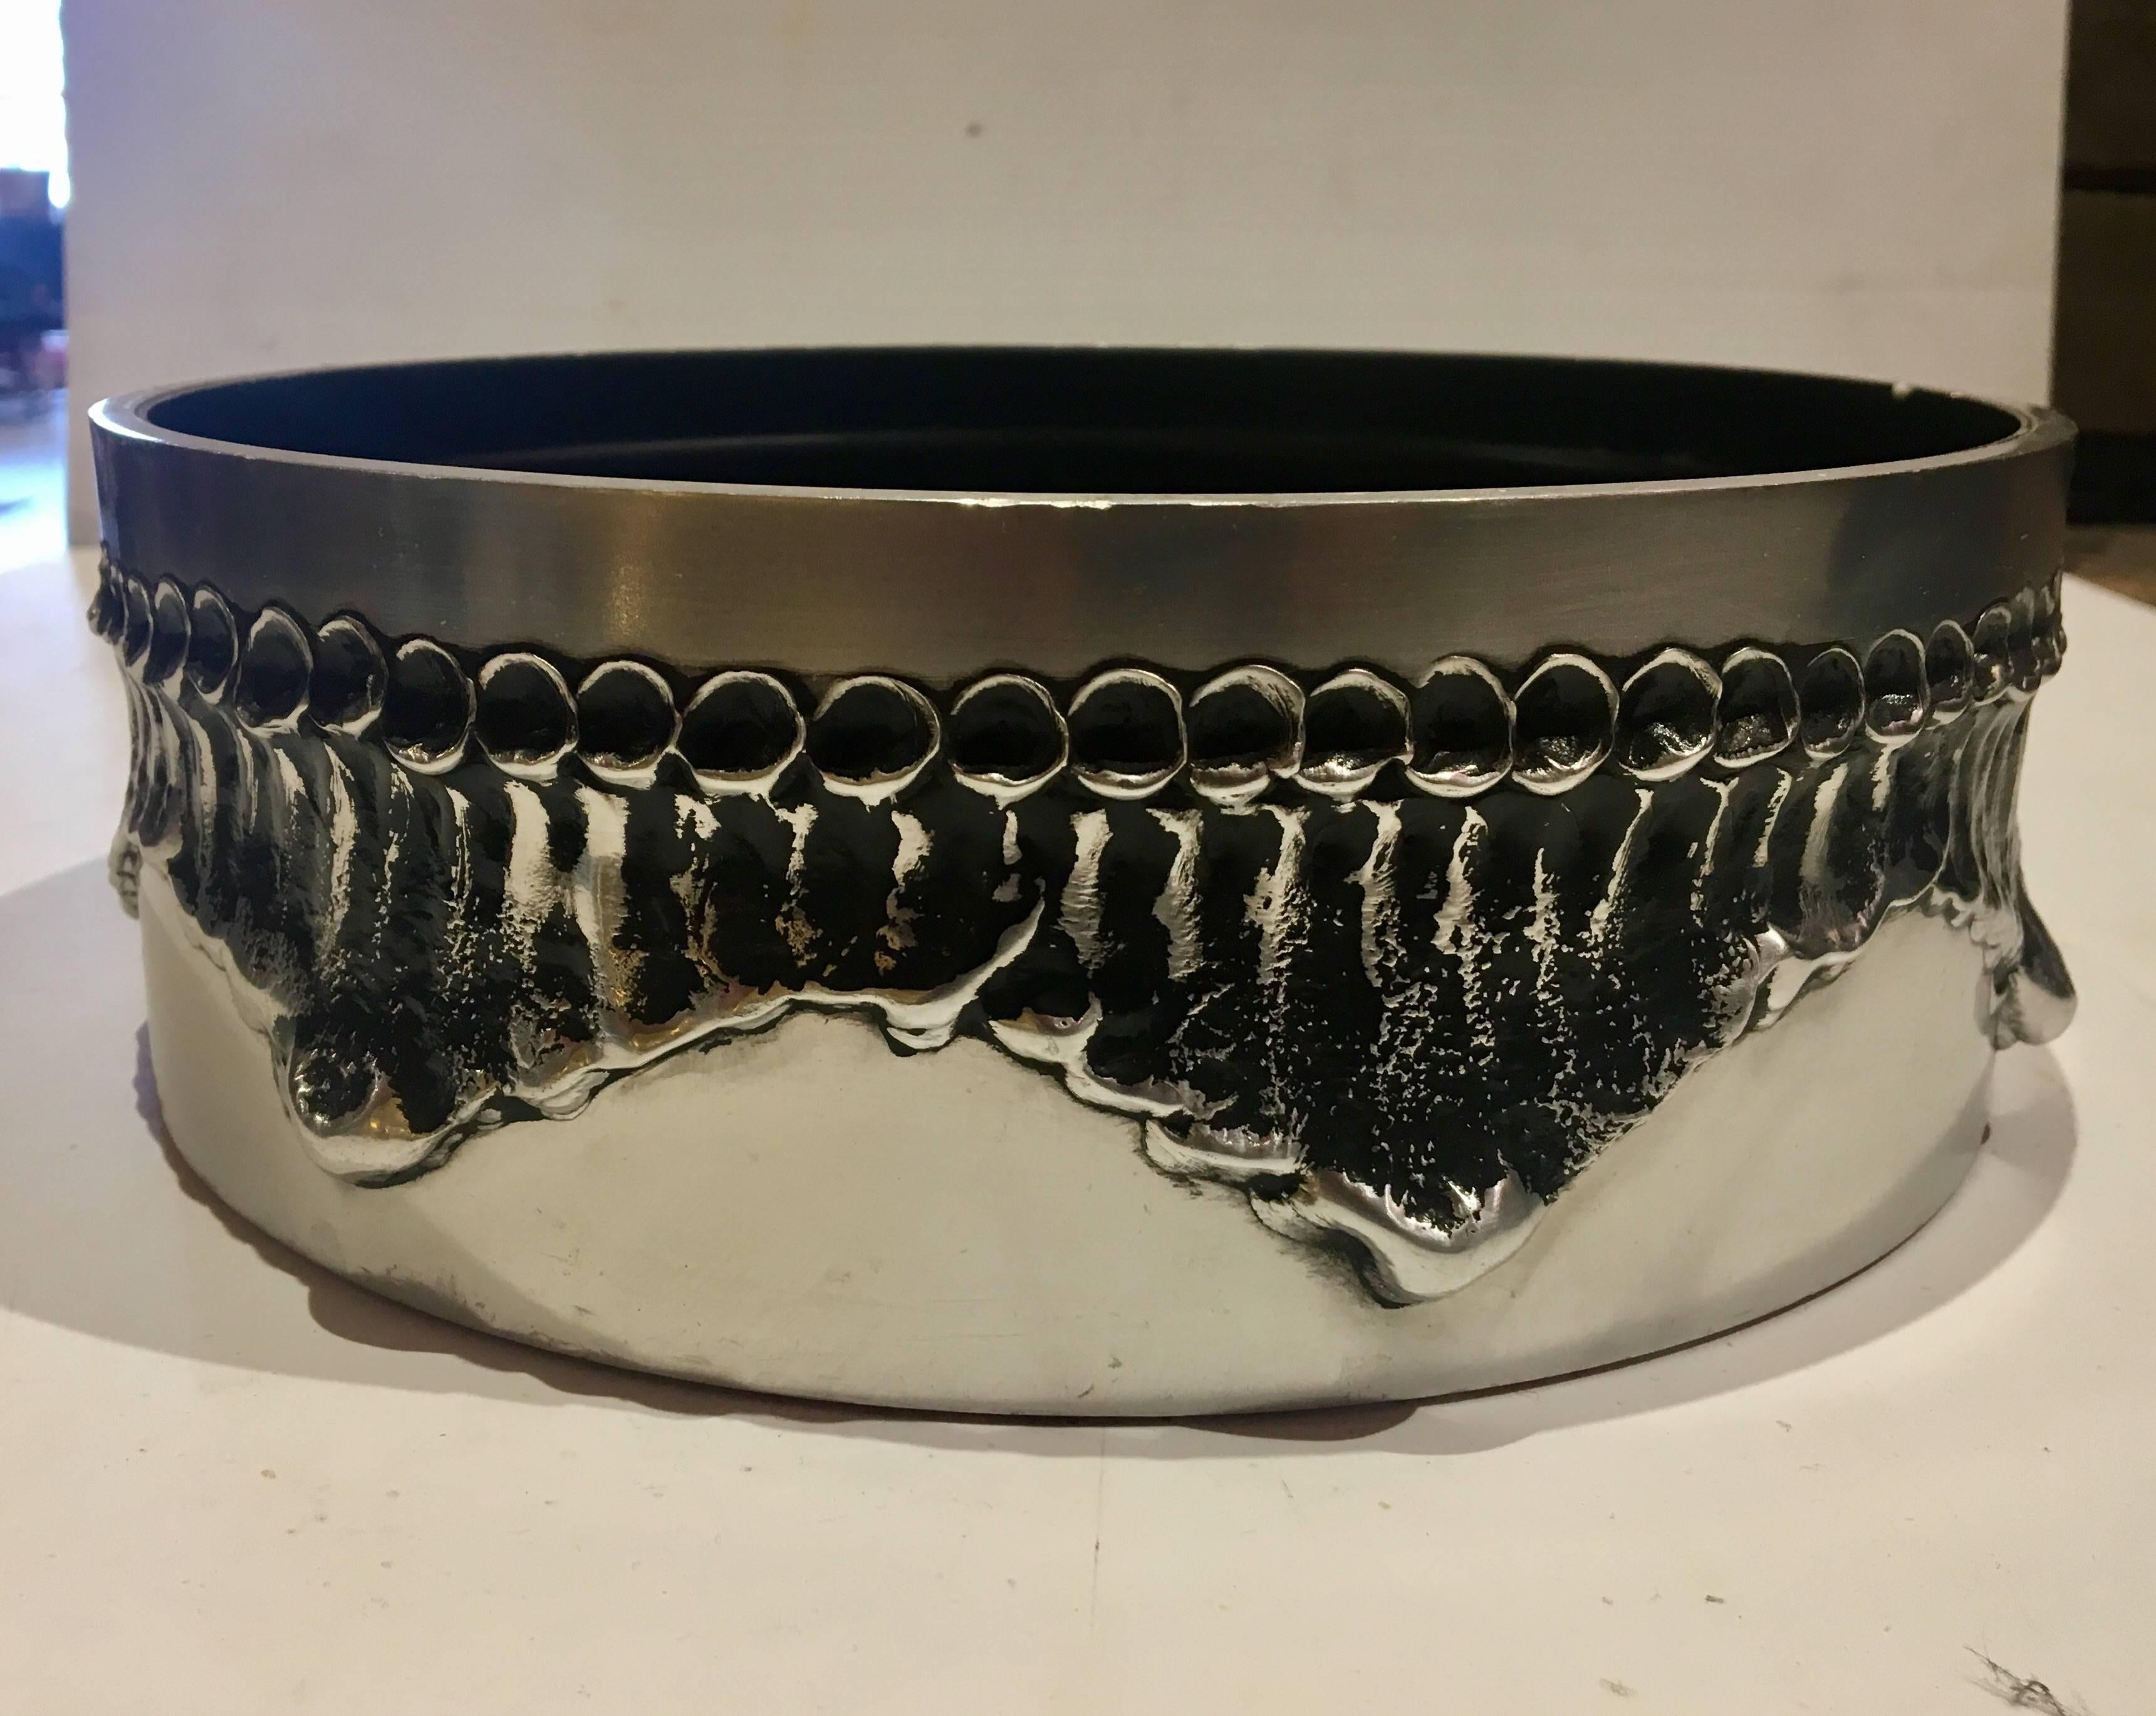 Belgian Rare Aluminum Brutal Centerpiece Bowl Attributed to Luyckx for Aluclair